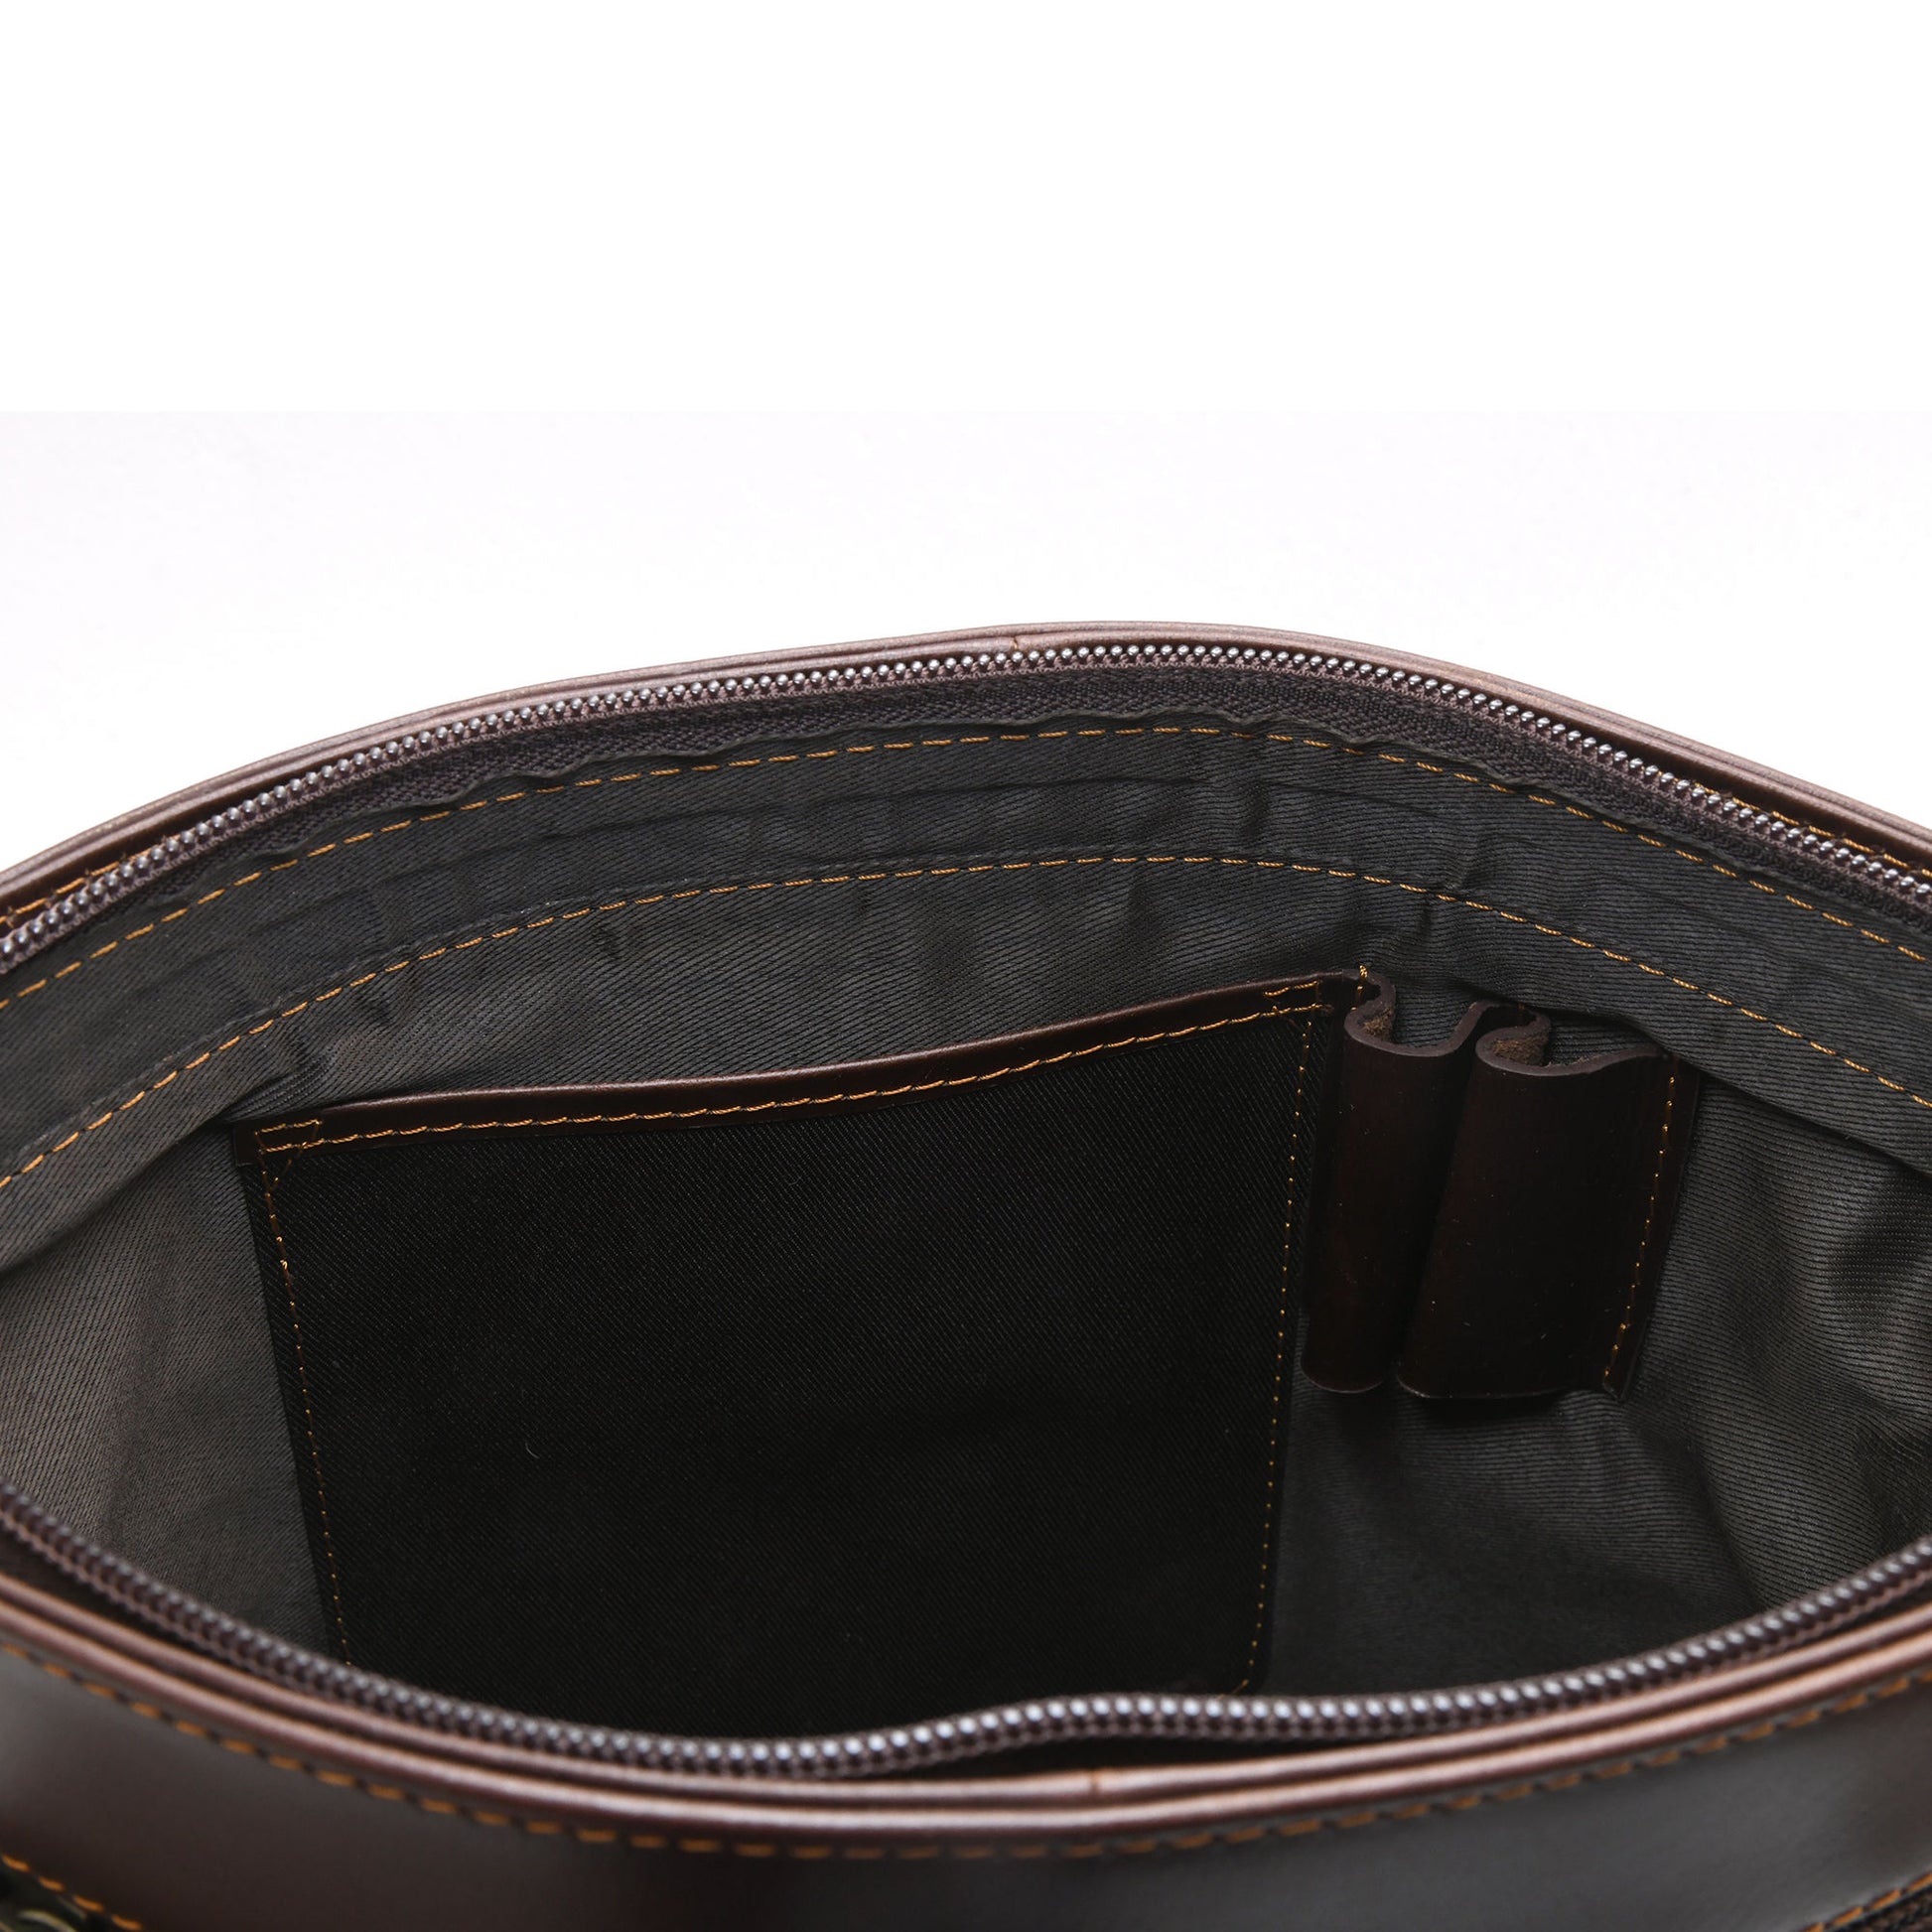 Style n Craft 392001 Cross-body Messenger Bag in Full Grain Dark Brown Leather - Inside Front Wall View showing 1 long Leather Pocket & 2 Pen or Pencil Holders in Leather